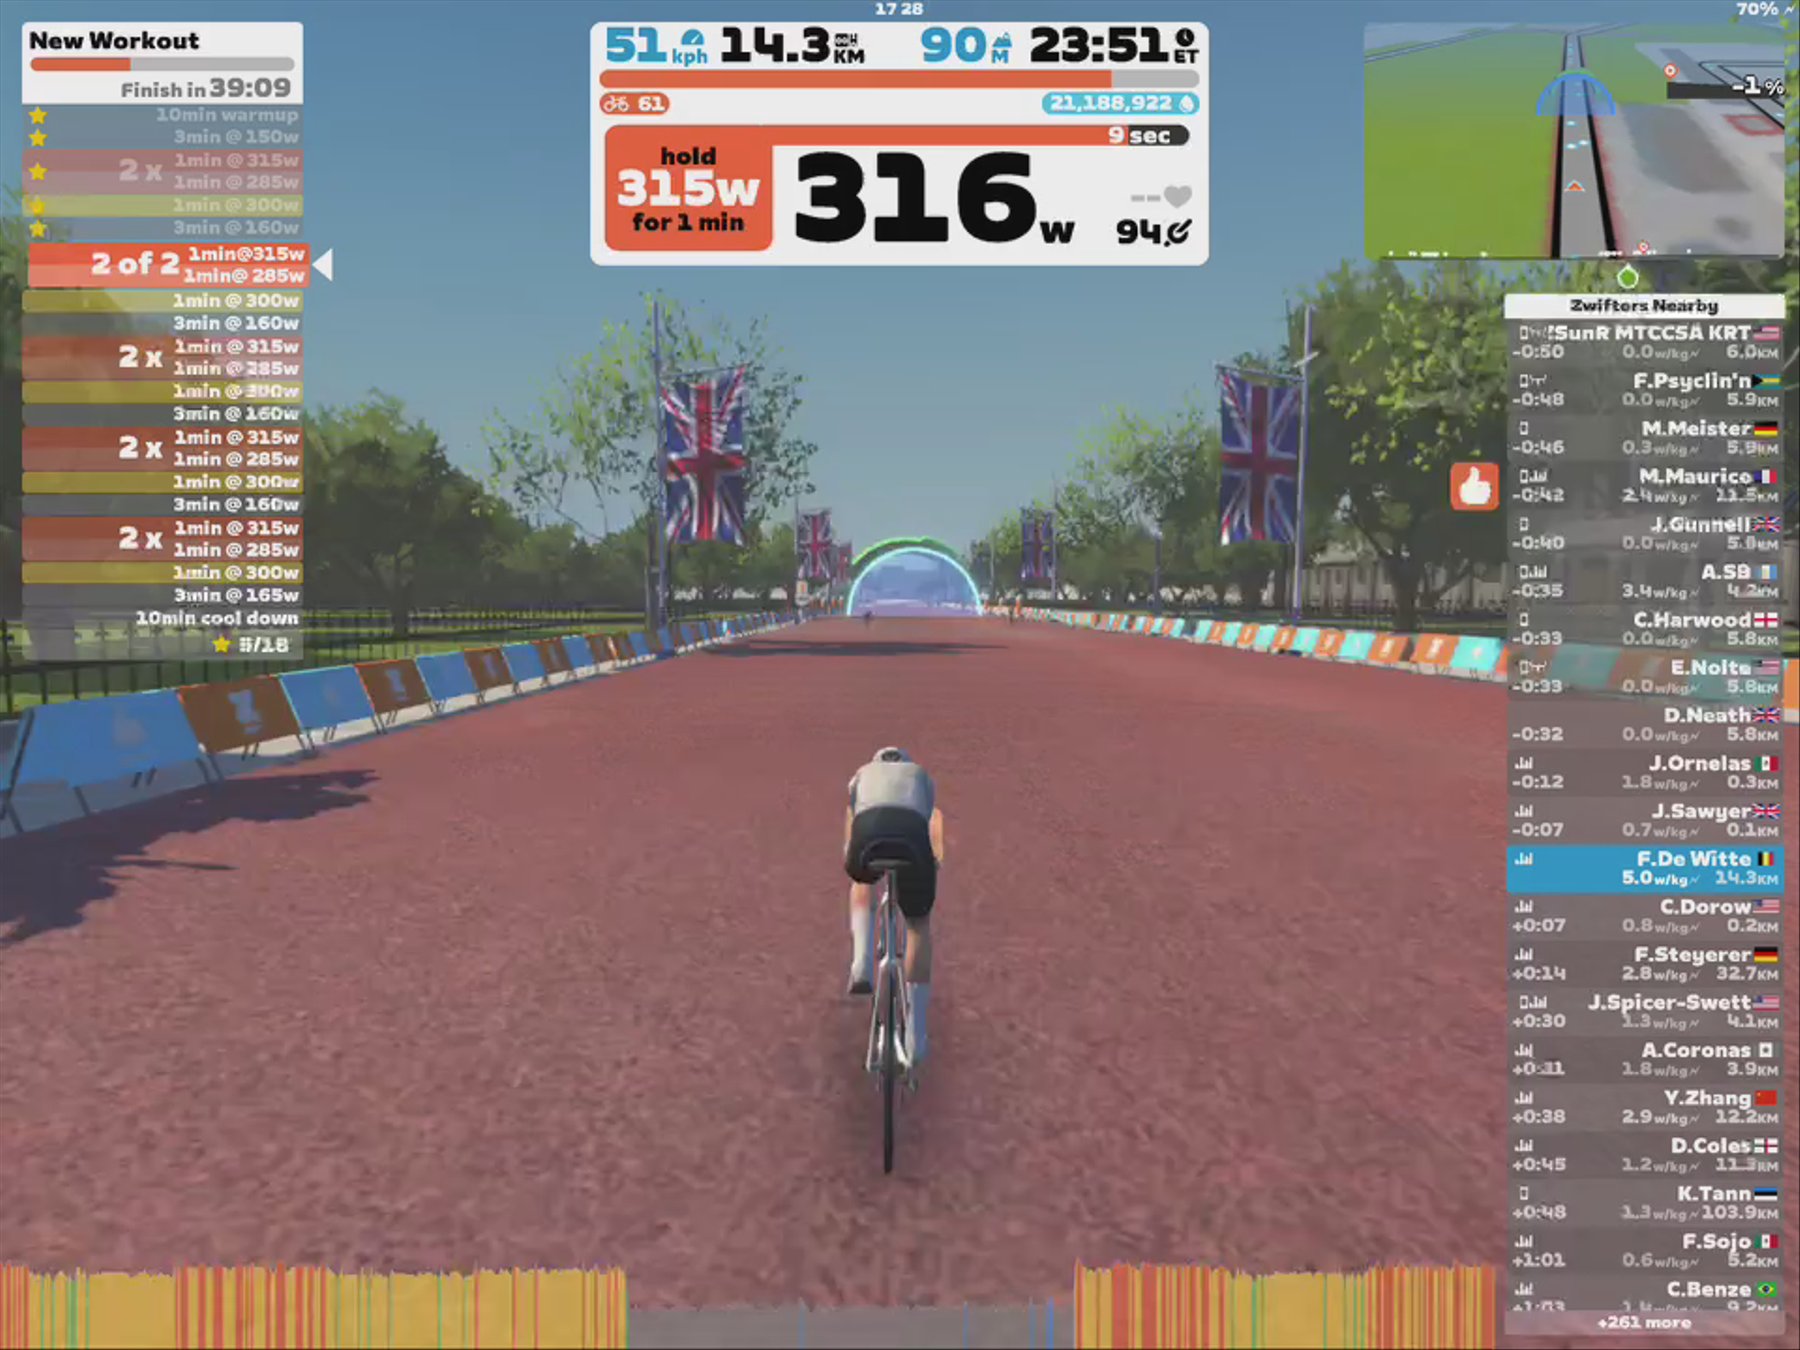 Zwift - New Workout in London